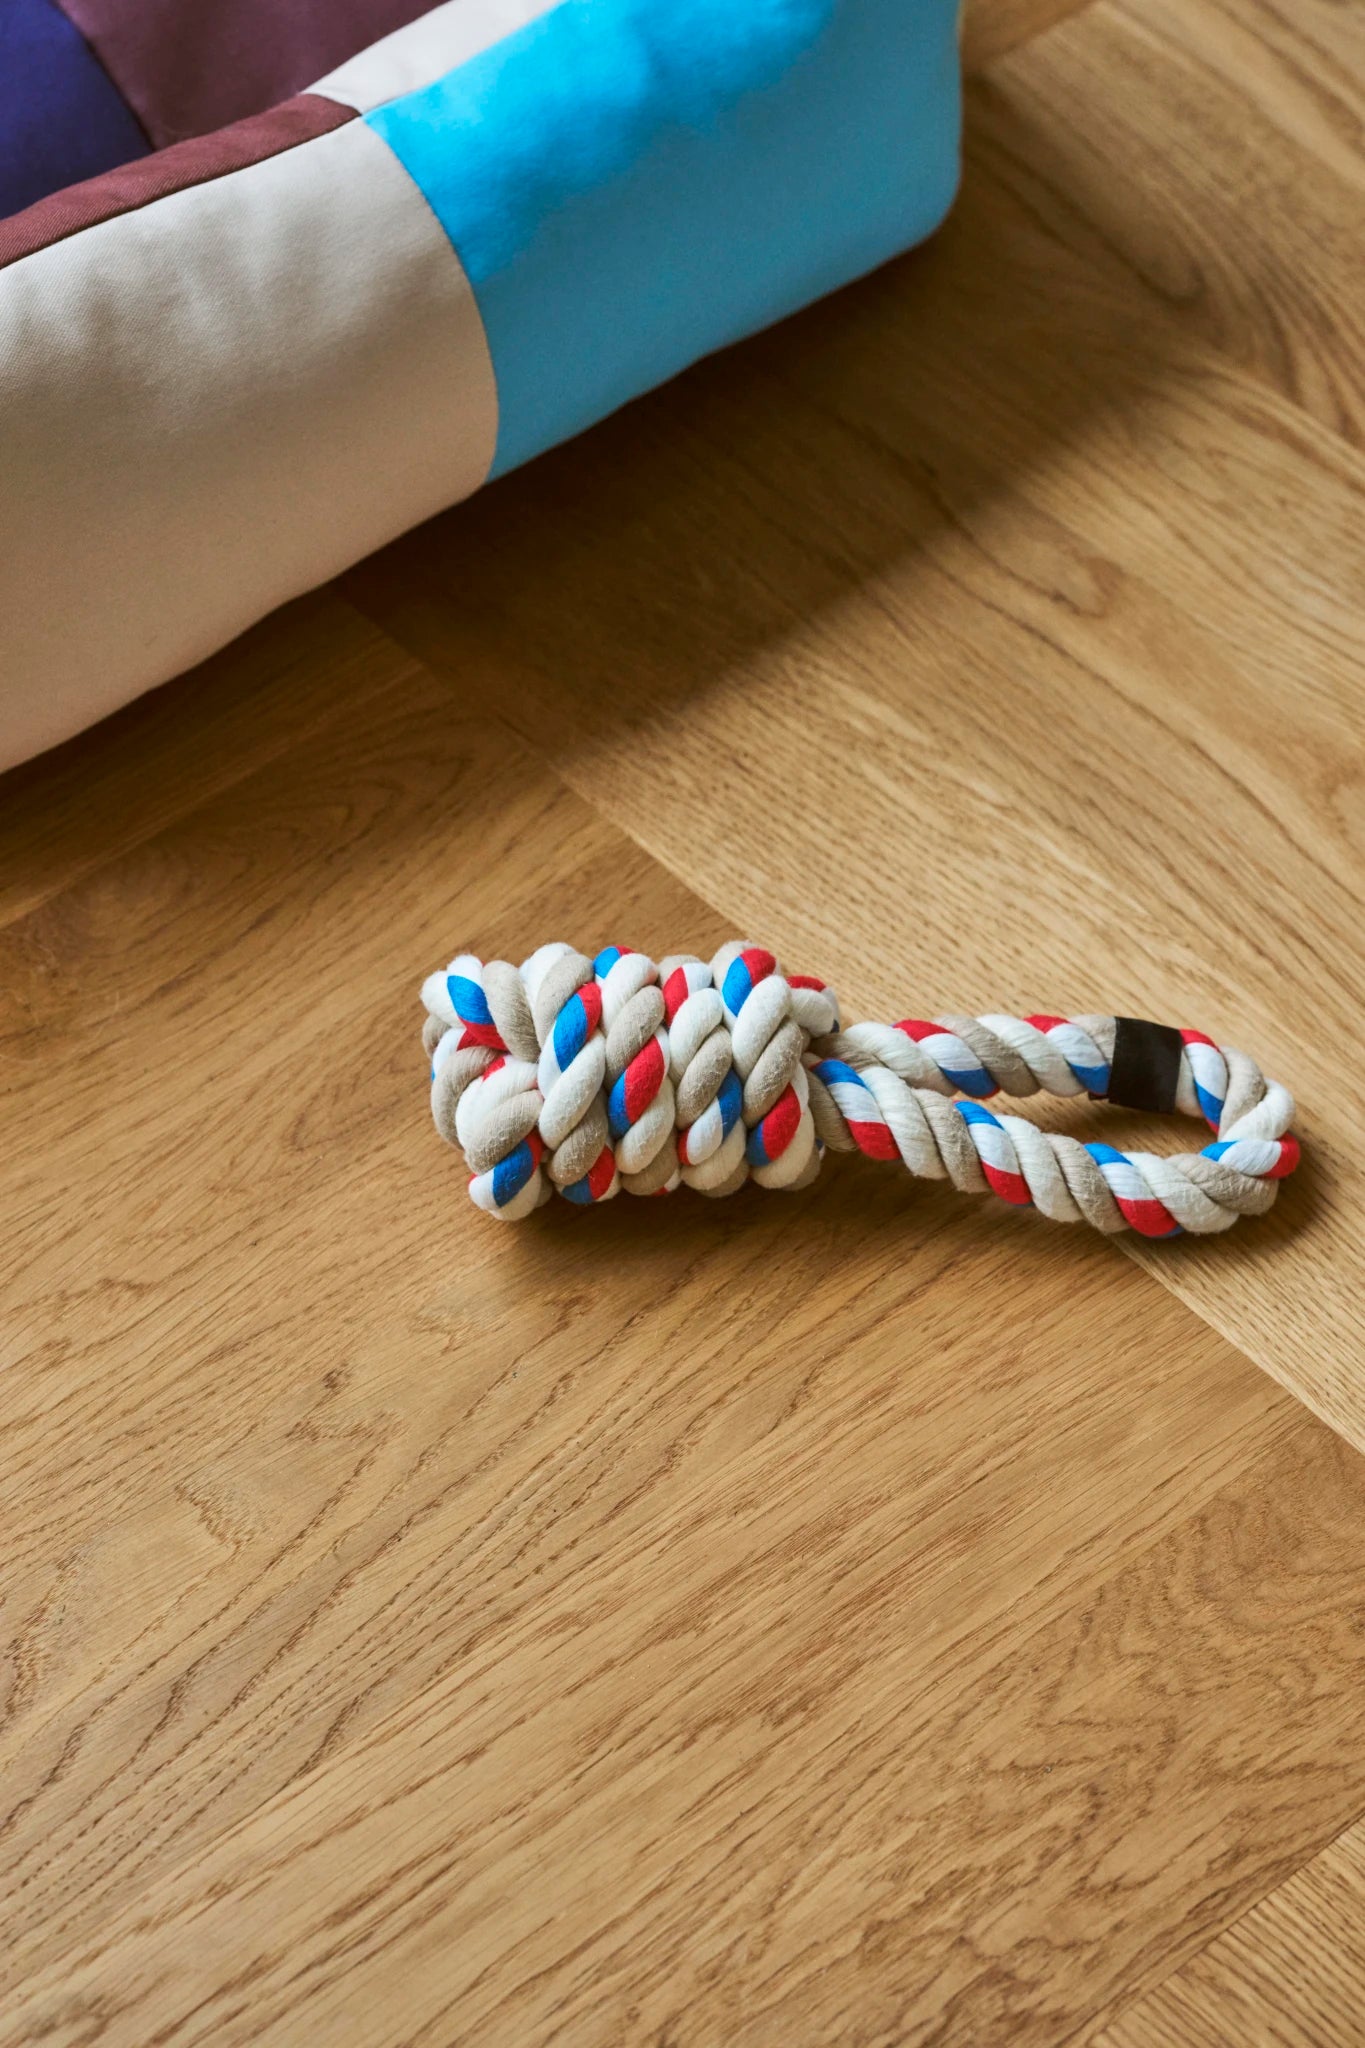 Dogs Rope Toy | Red, Turquoise, Off White | by HAY - Lifestory